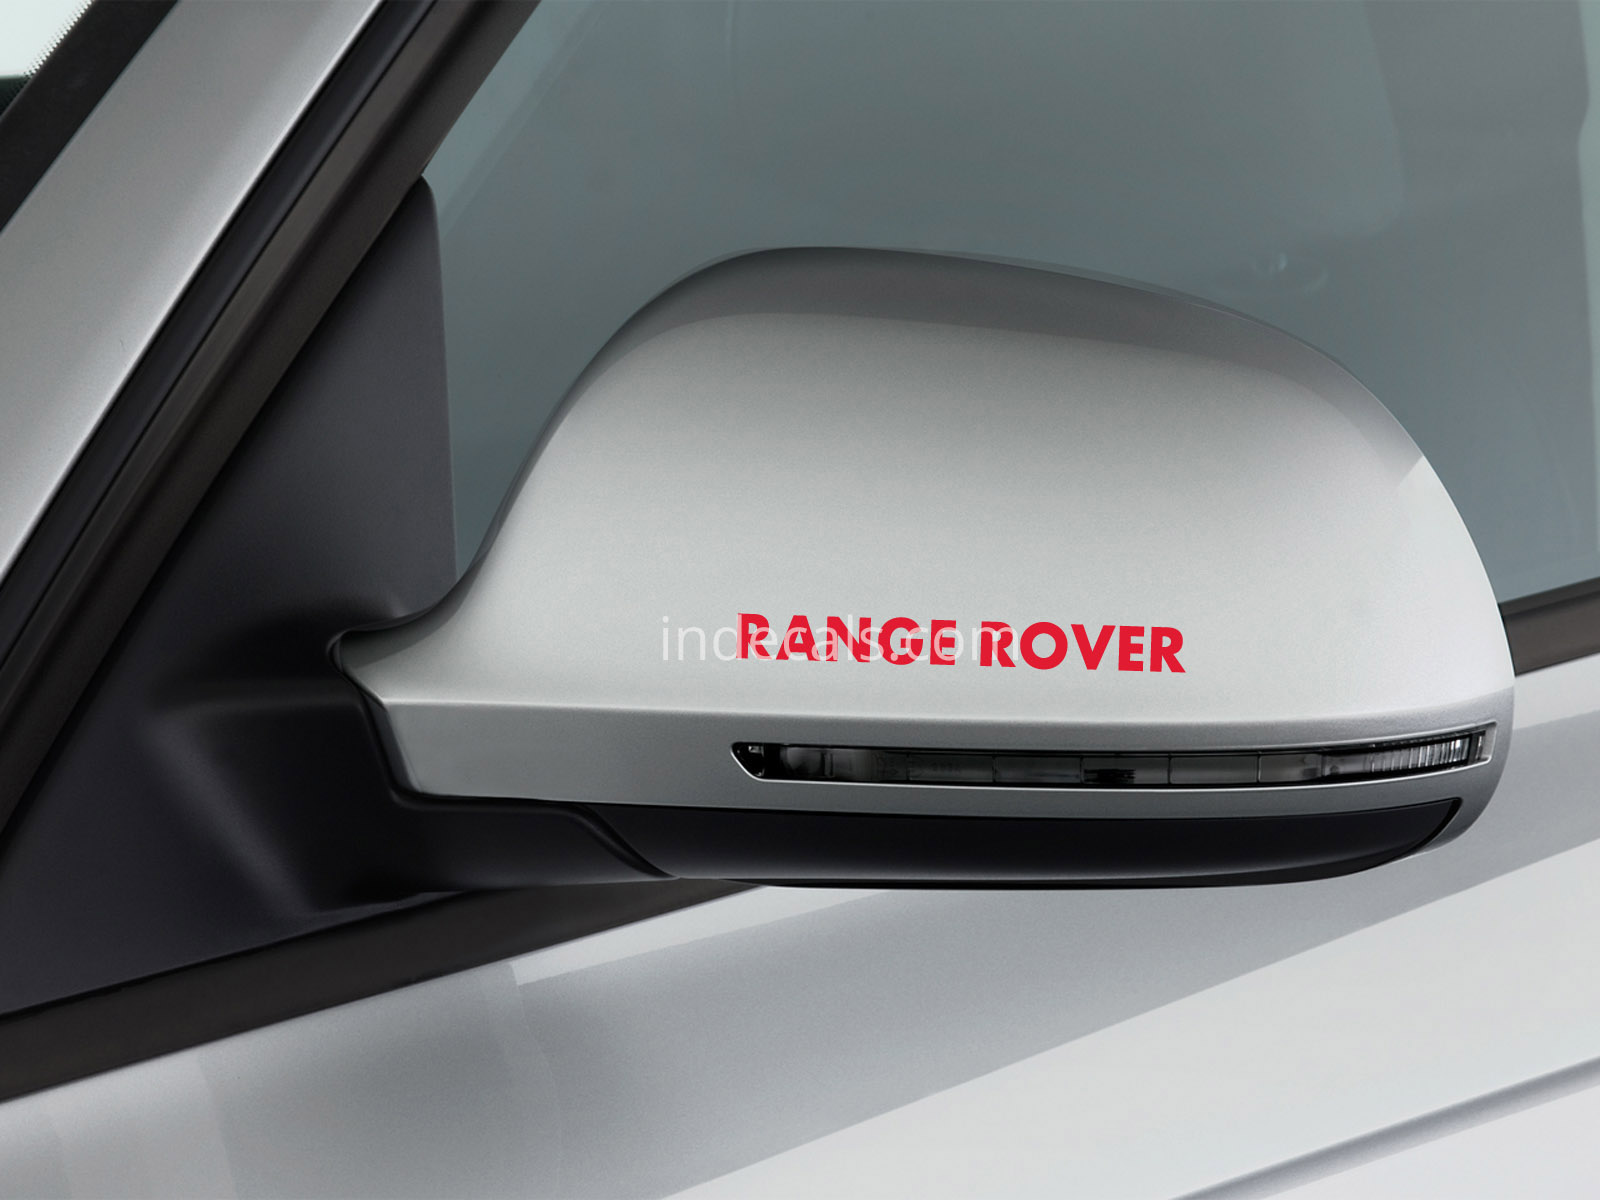 3 x Range Rover Stickers for Mirrors - Red